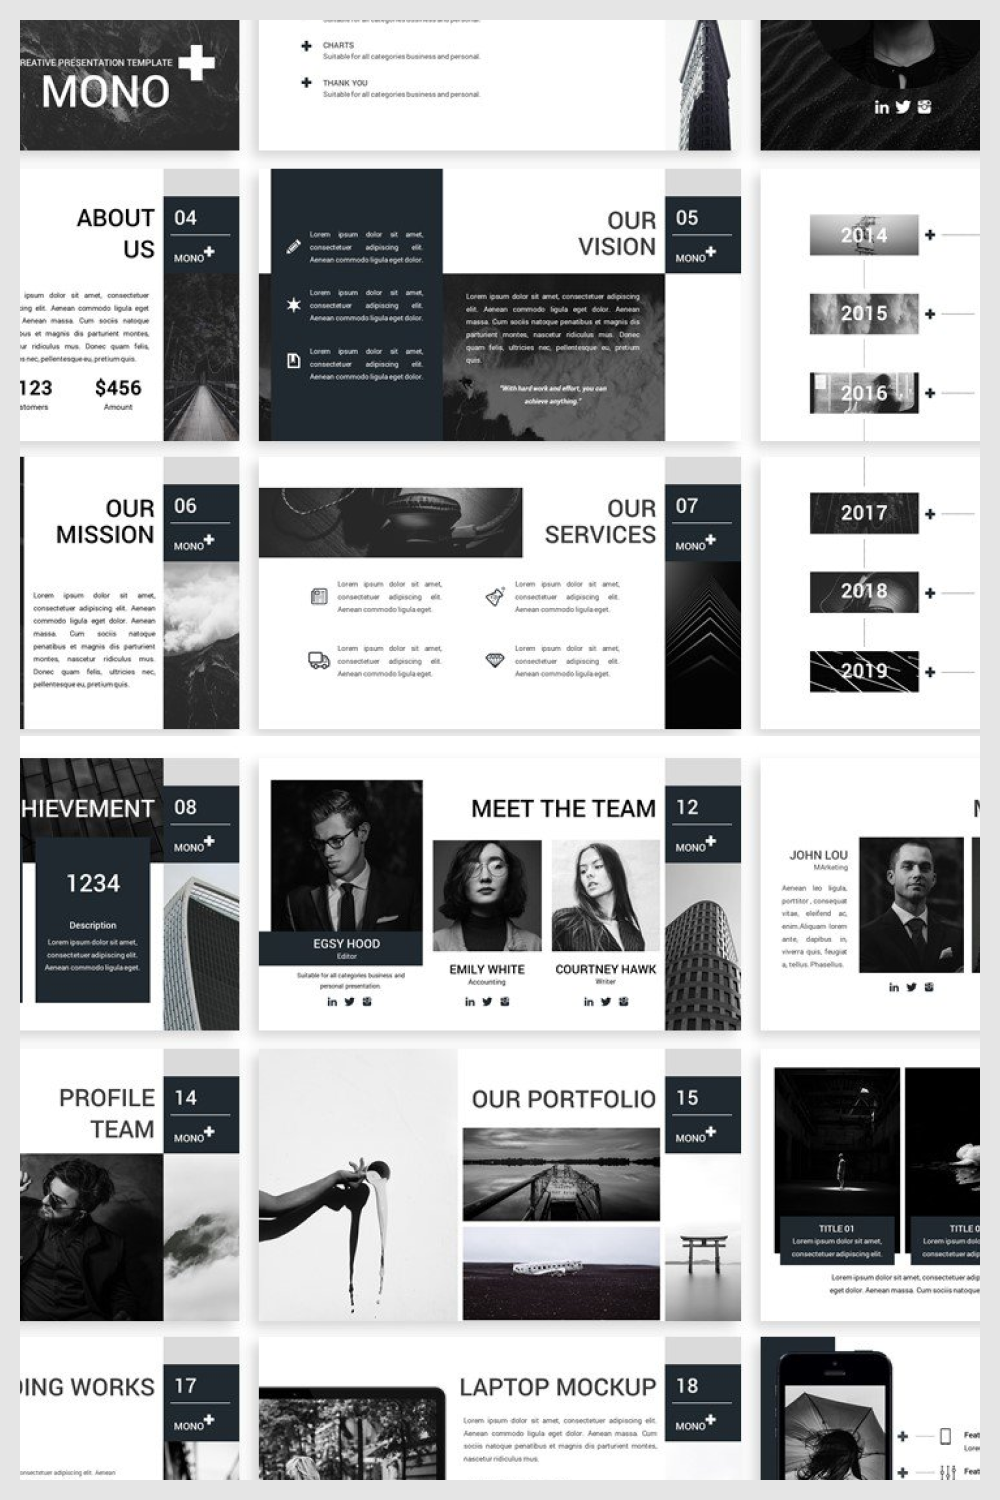 Lookbook pages in black and white style.